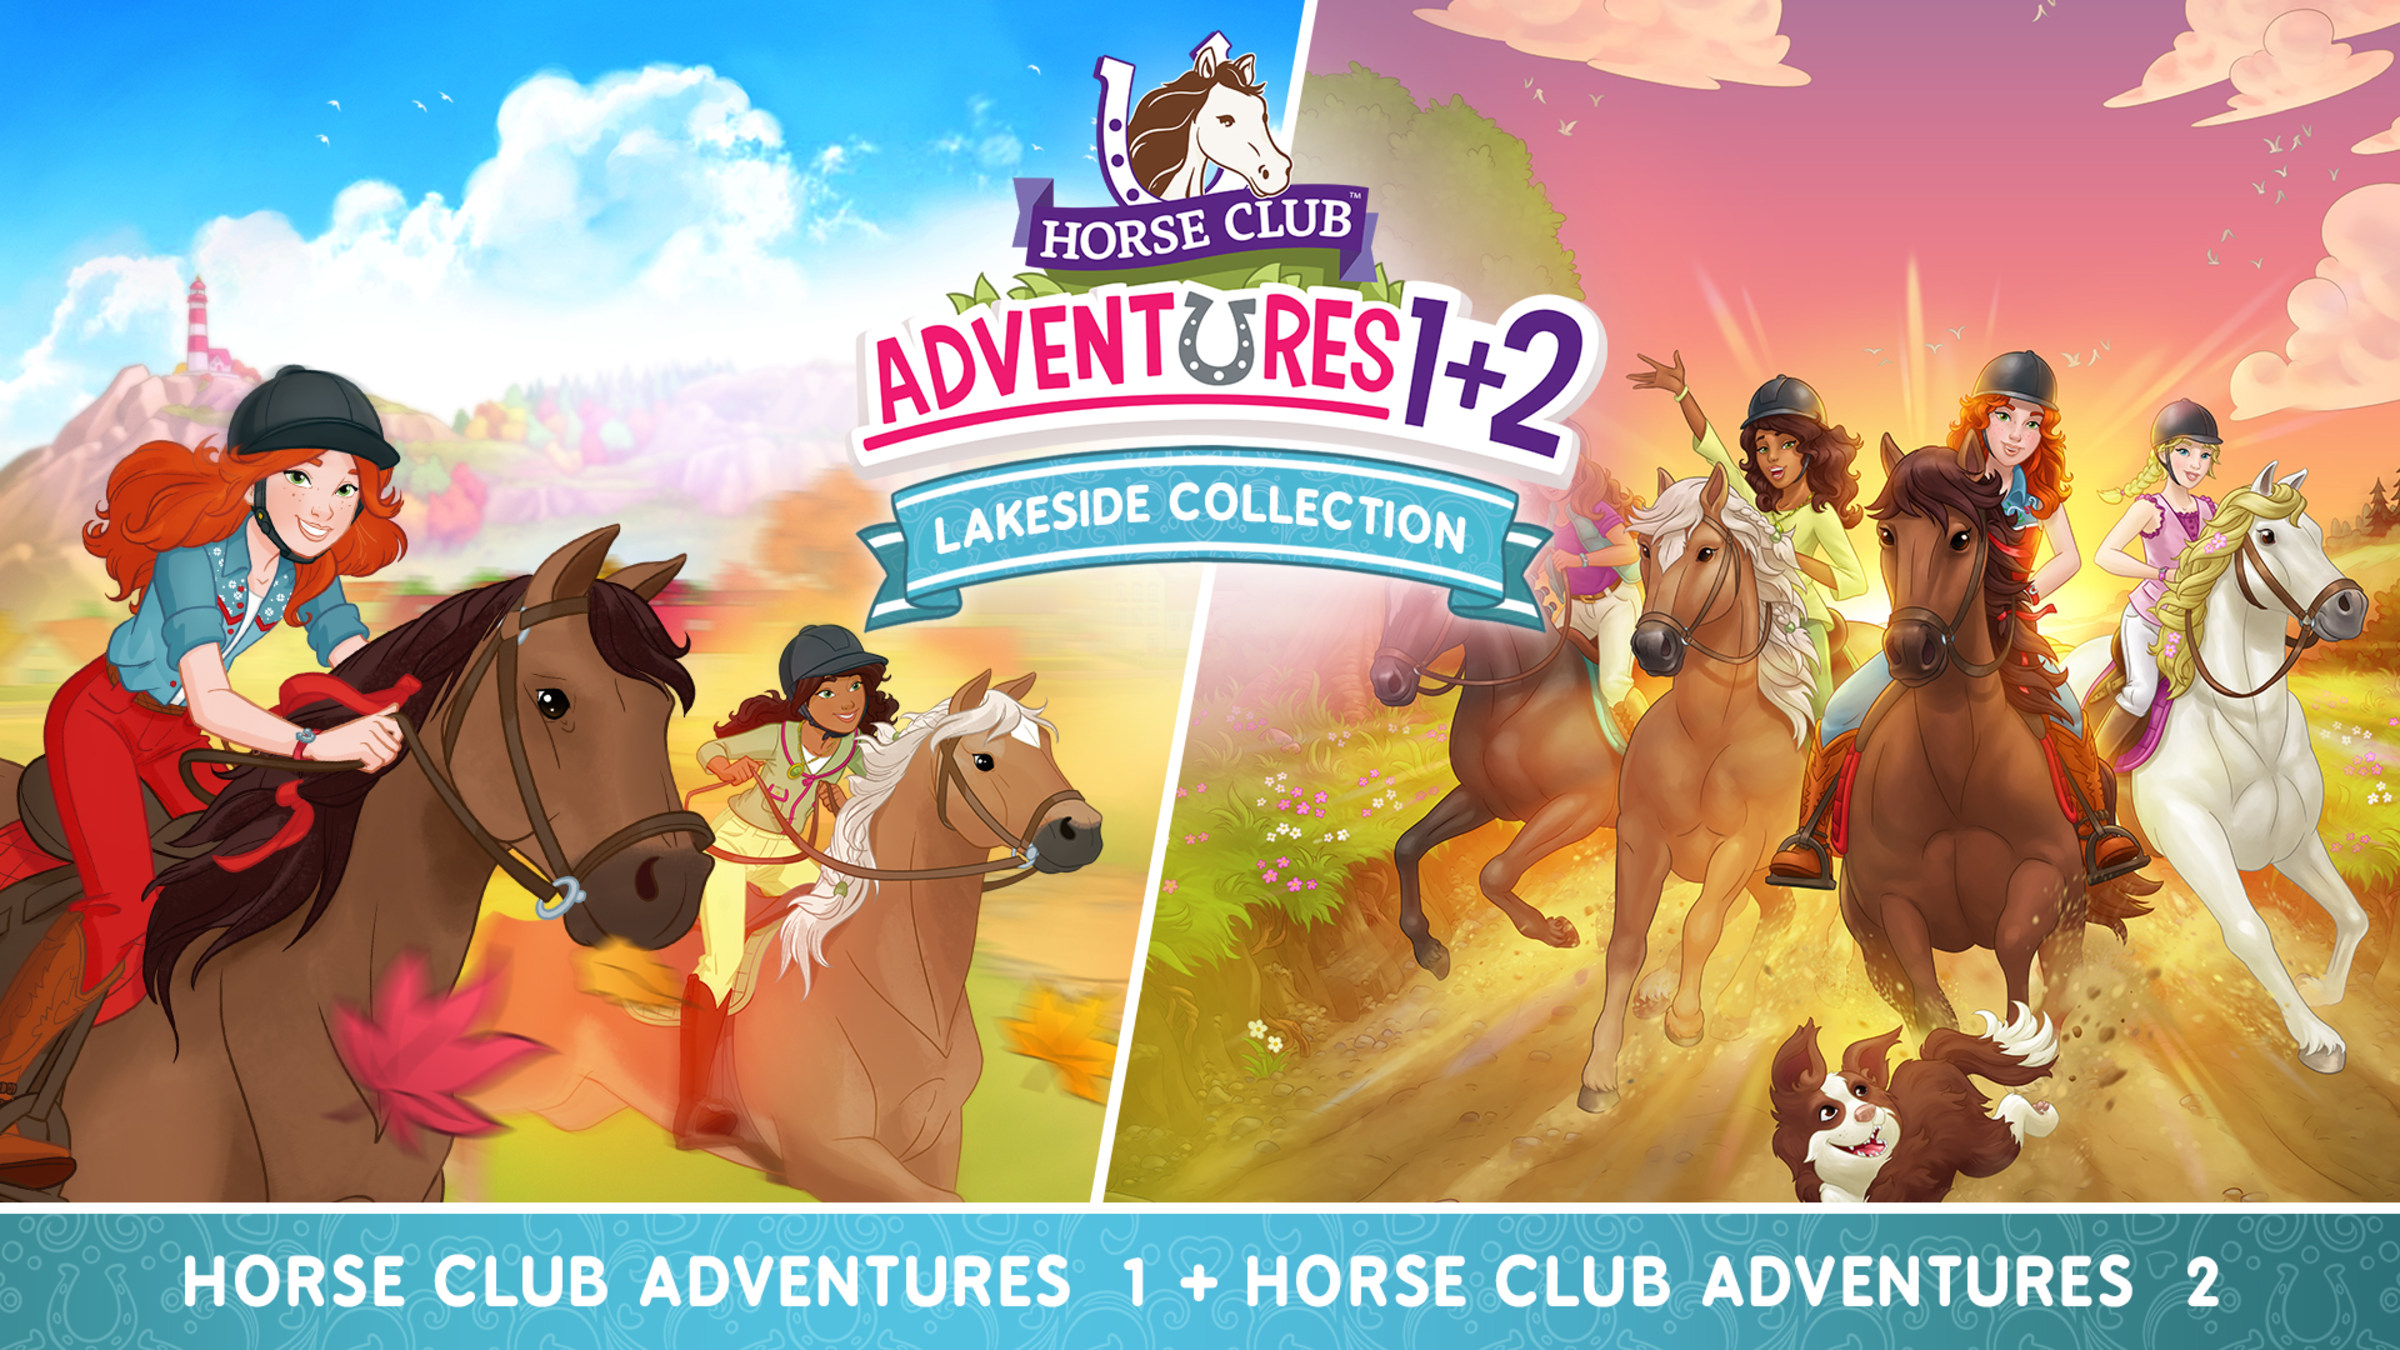 Collection Adventures: Site Nintendo - Official Lakeside Switch for HORSE CLUB Nintendo